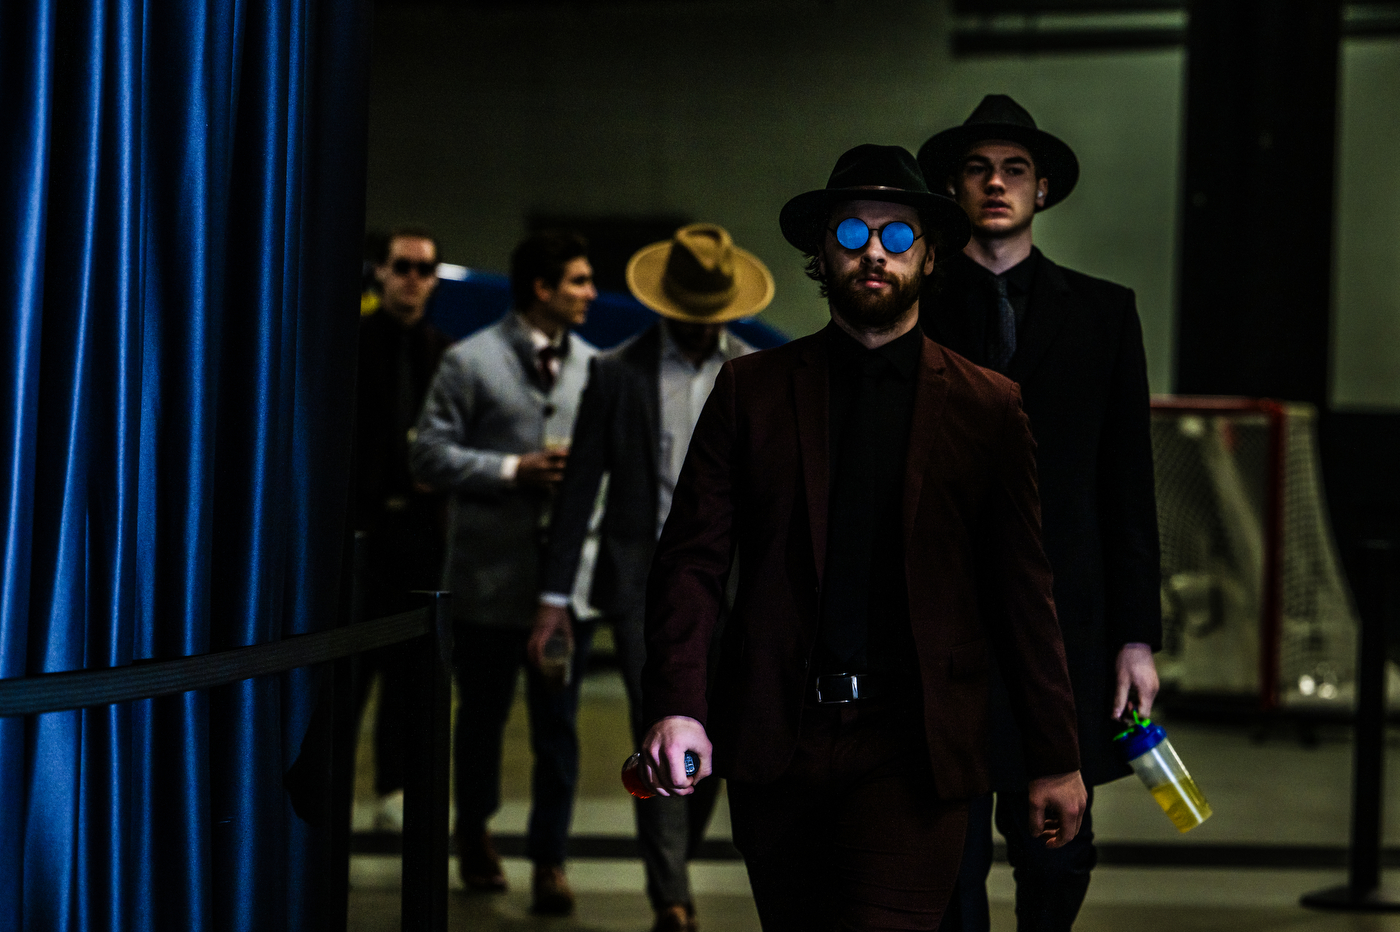 Mens hockey players entering TD Garden in suits and hats.